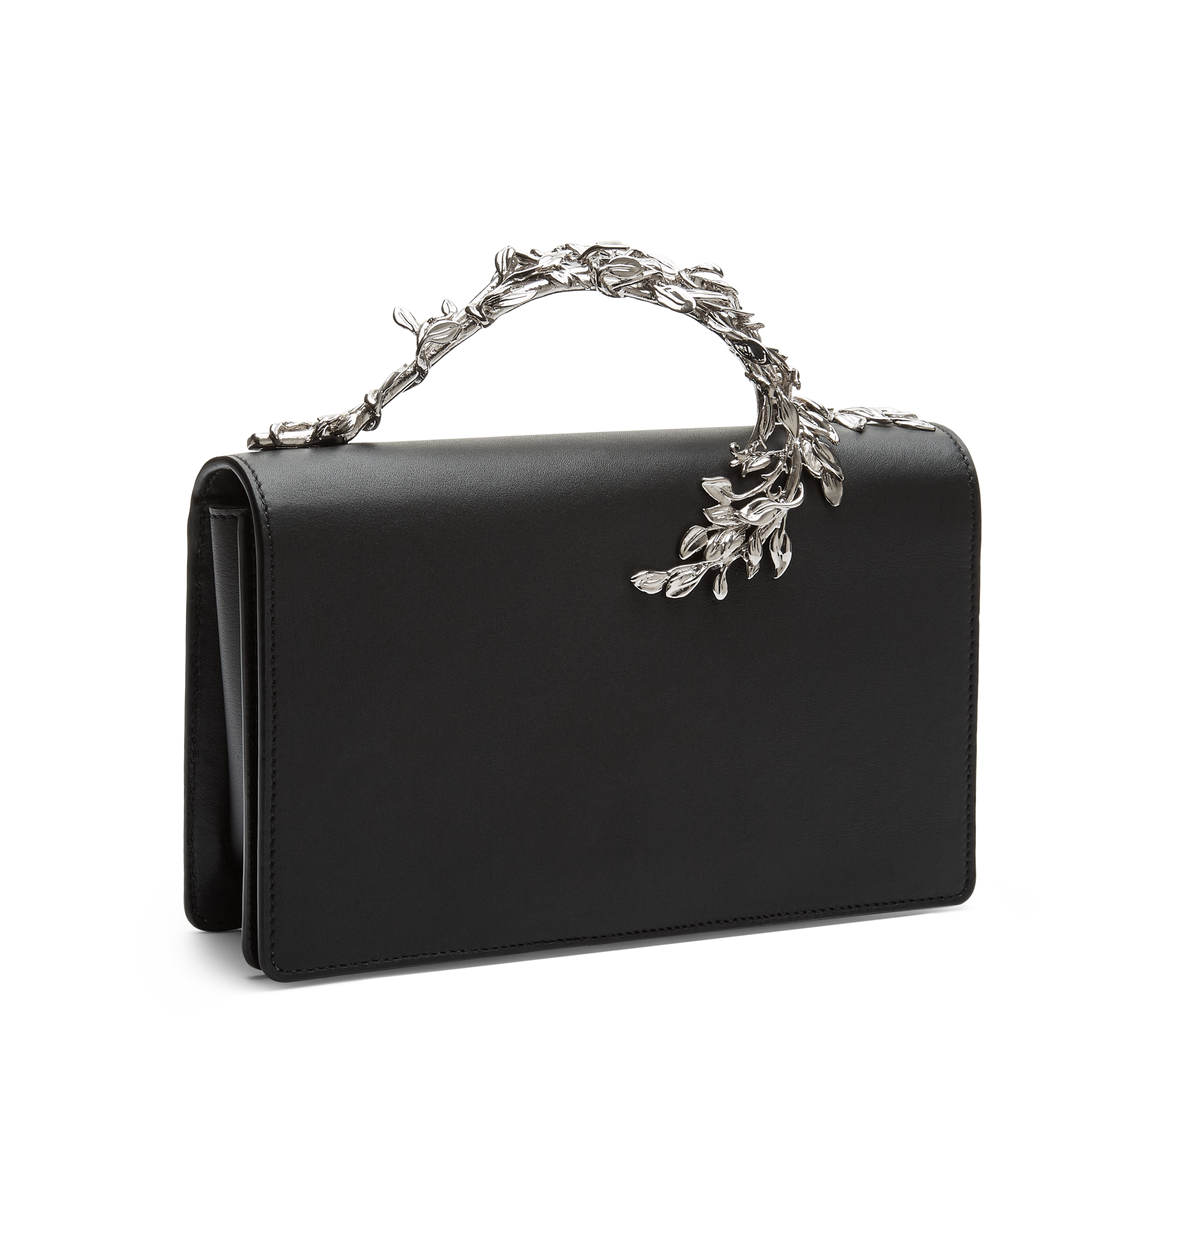 Black Calf Leather with Silver Leaves